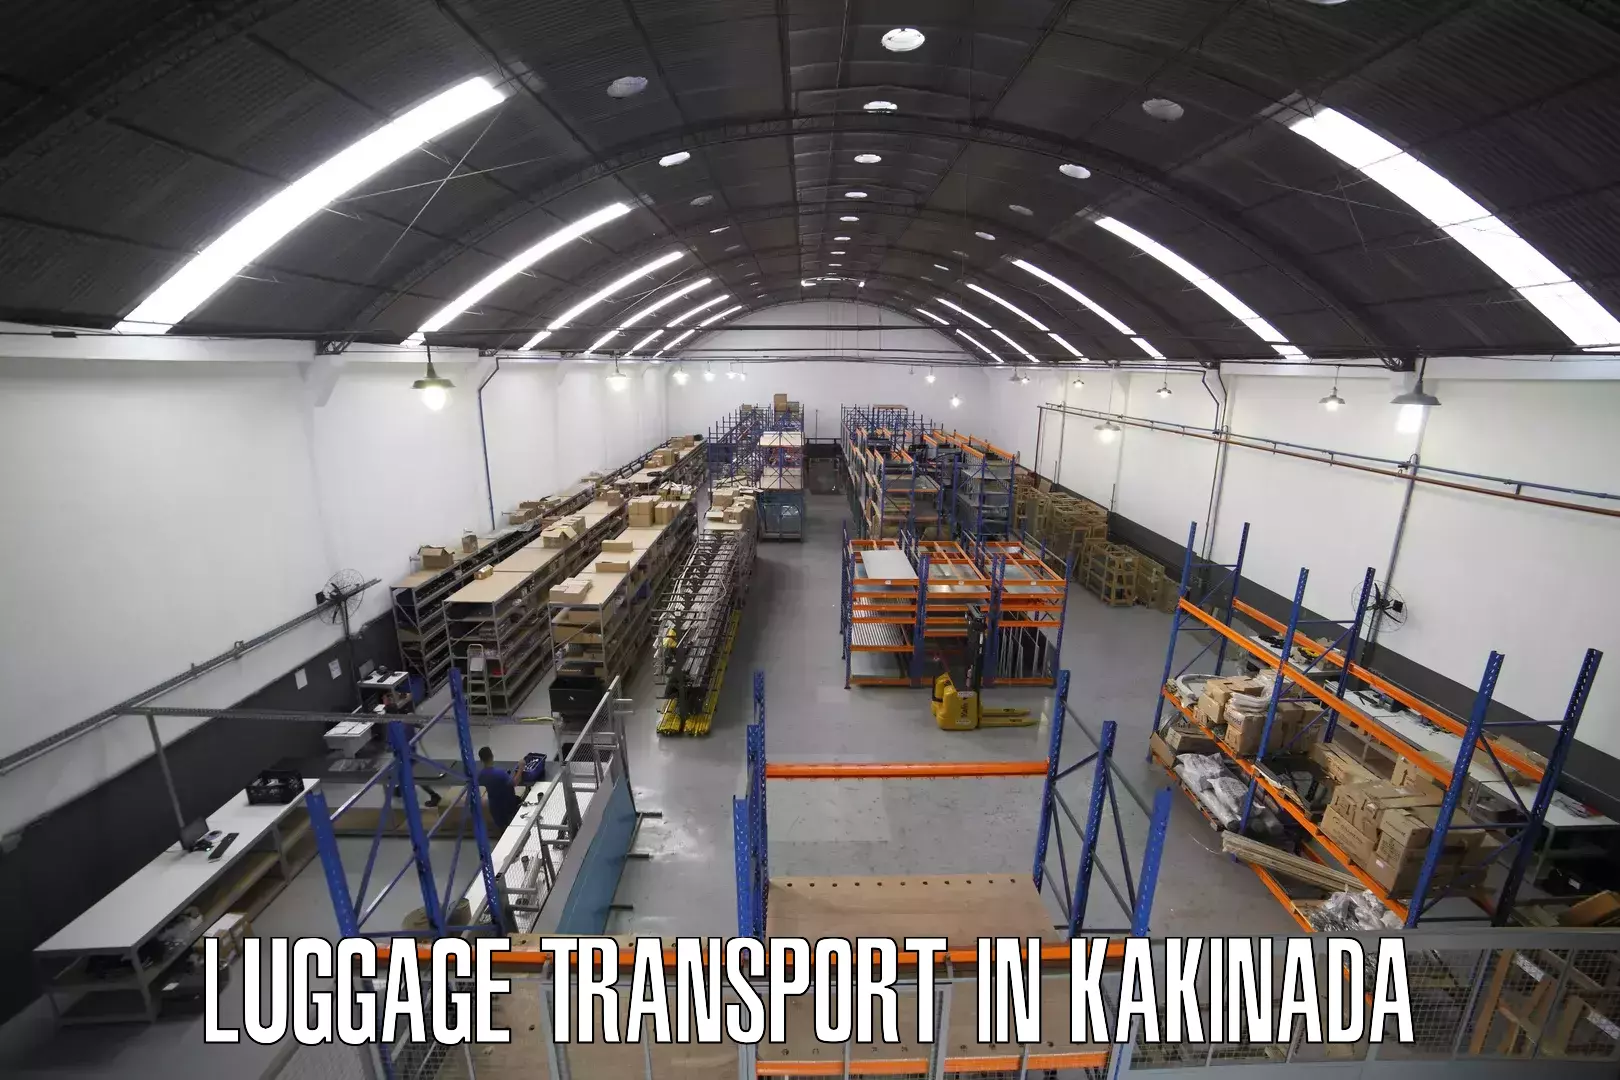 Luggage shipping trends in Kakinada